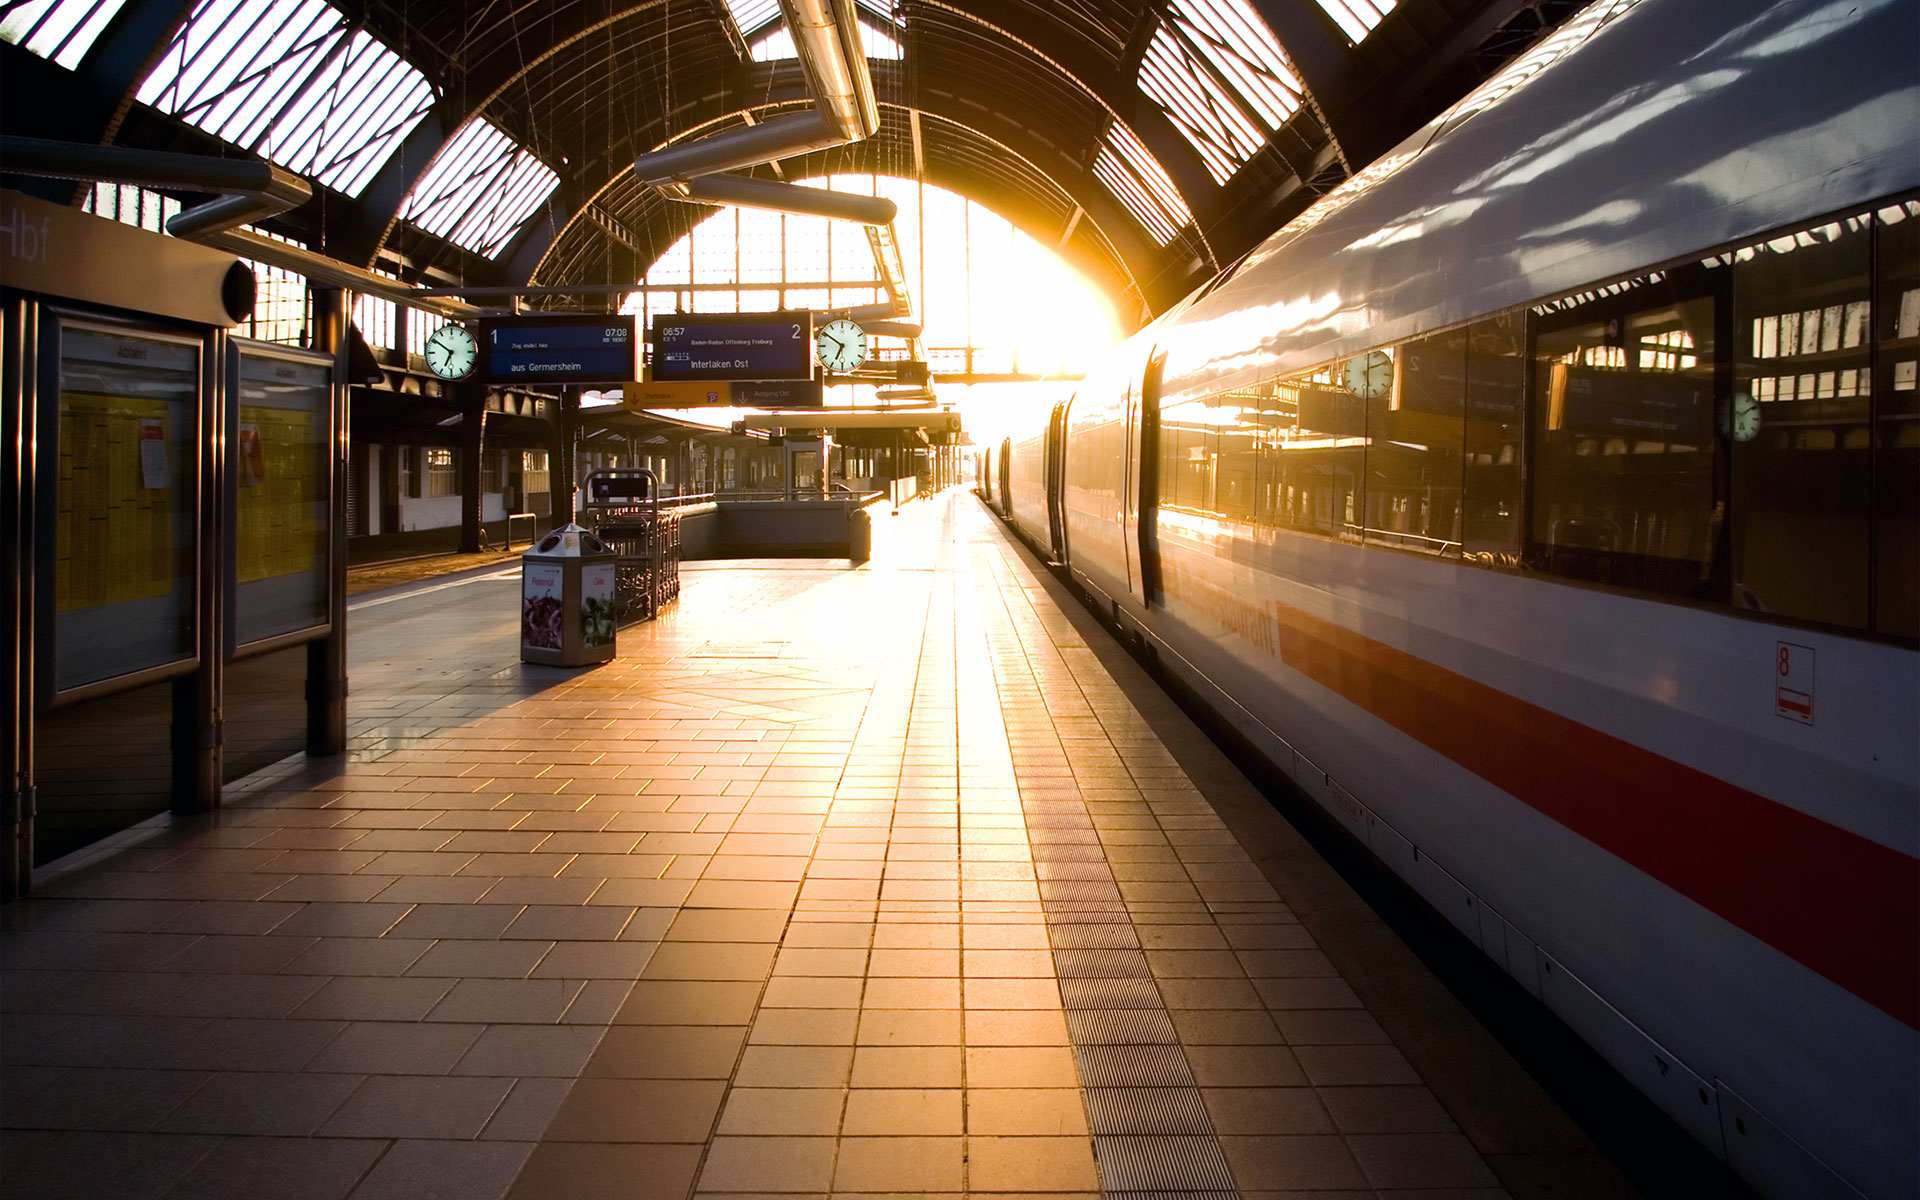 Karlsruhe Hauptbahnhof is currently the end of the line for ICE trains heading south towards Switzerland. The main Rhine Valley rail route is blocked south of Karlsruhe.  (photo © Martin Fischer / dreamstime.com)